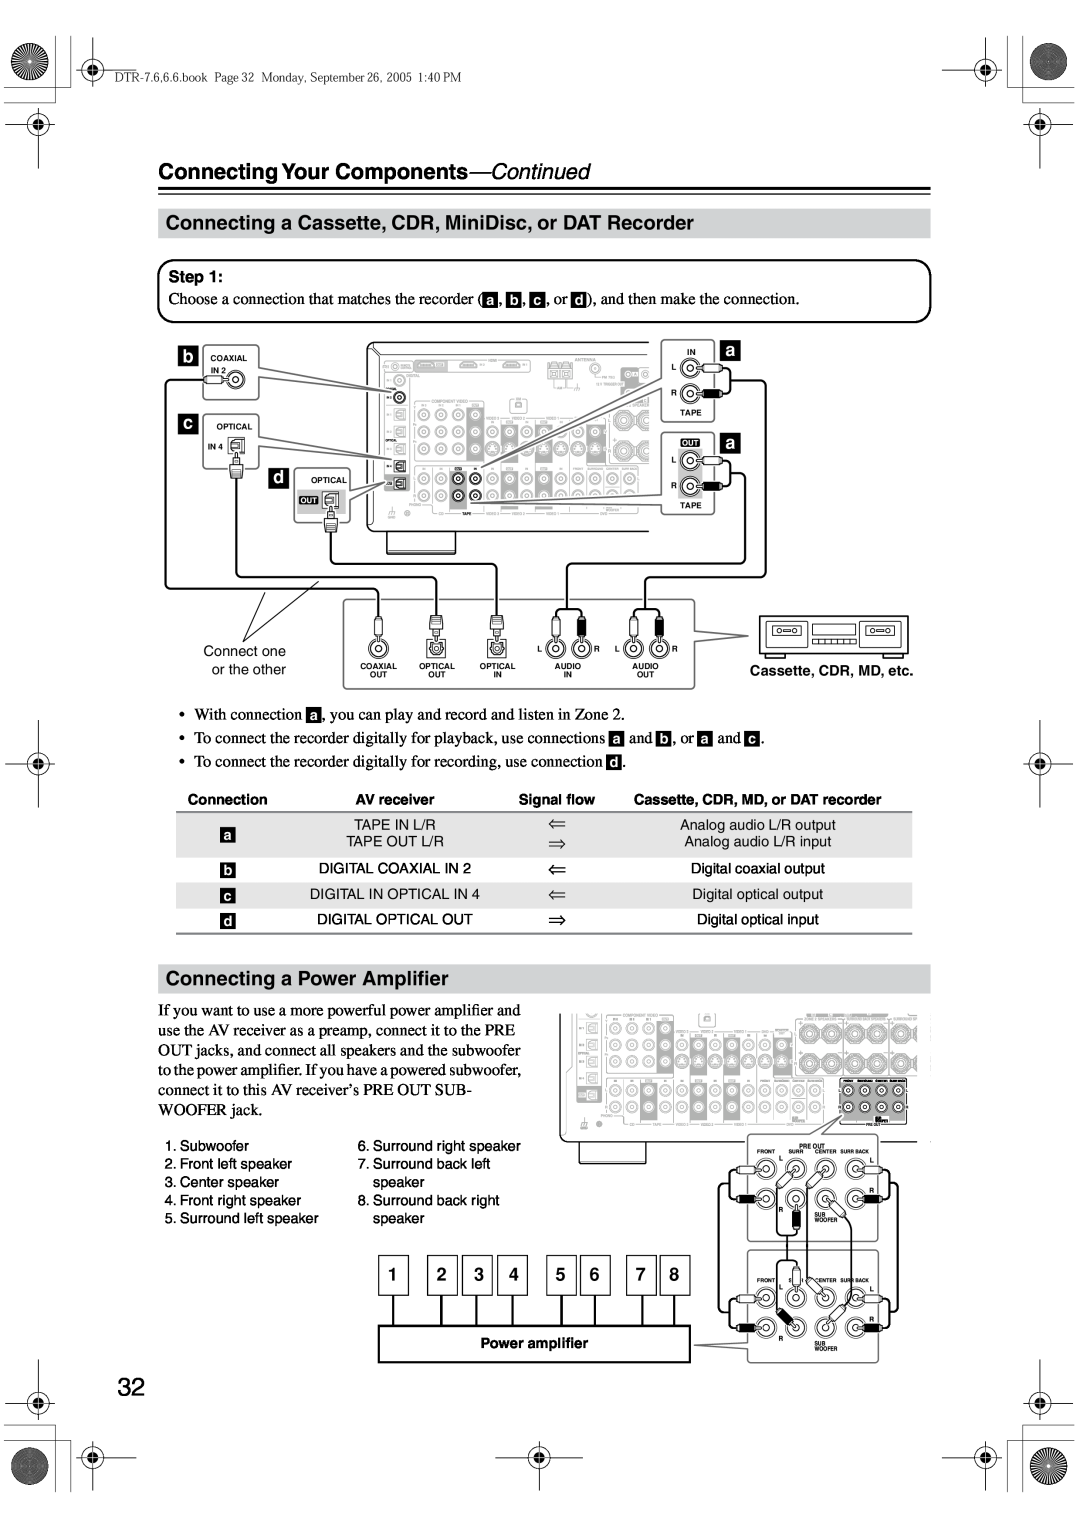 Integra DTR-7.6/6.6 instruction manual Connecting a Power Ampliﬁer, Connecting Your Components—Continued 